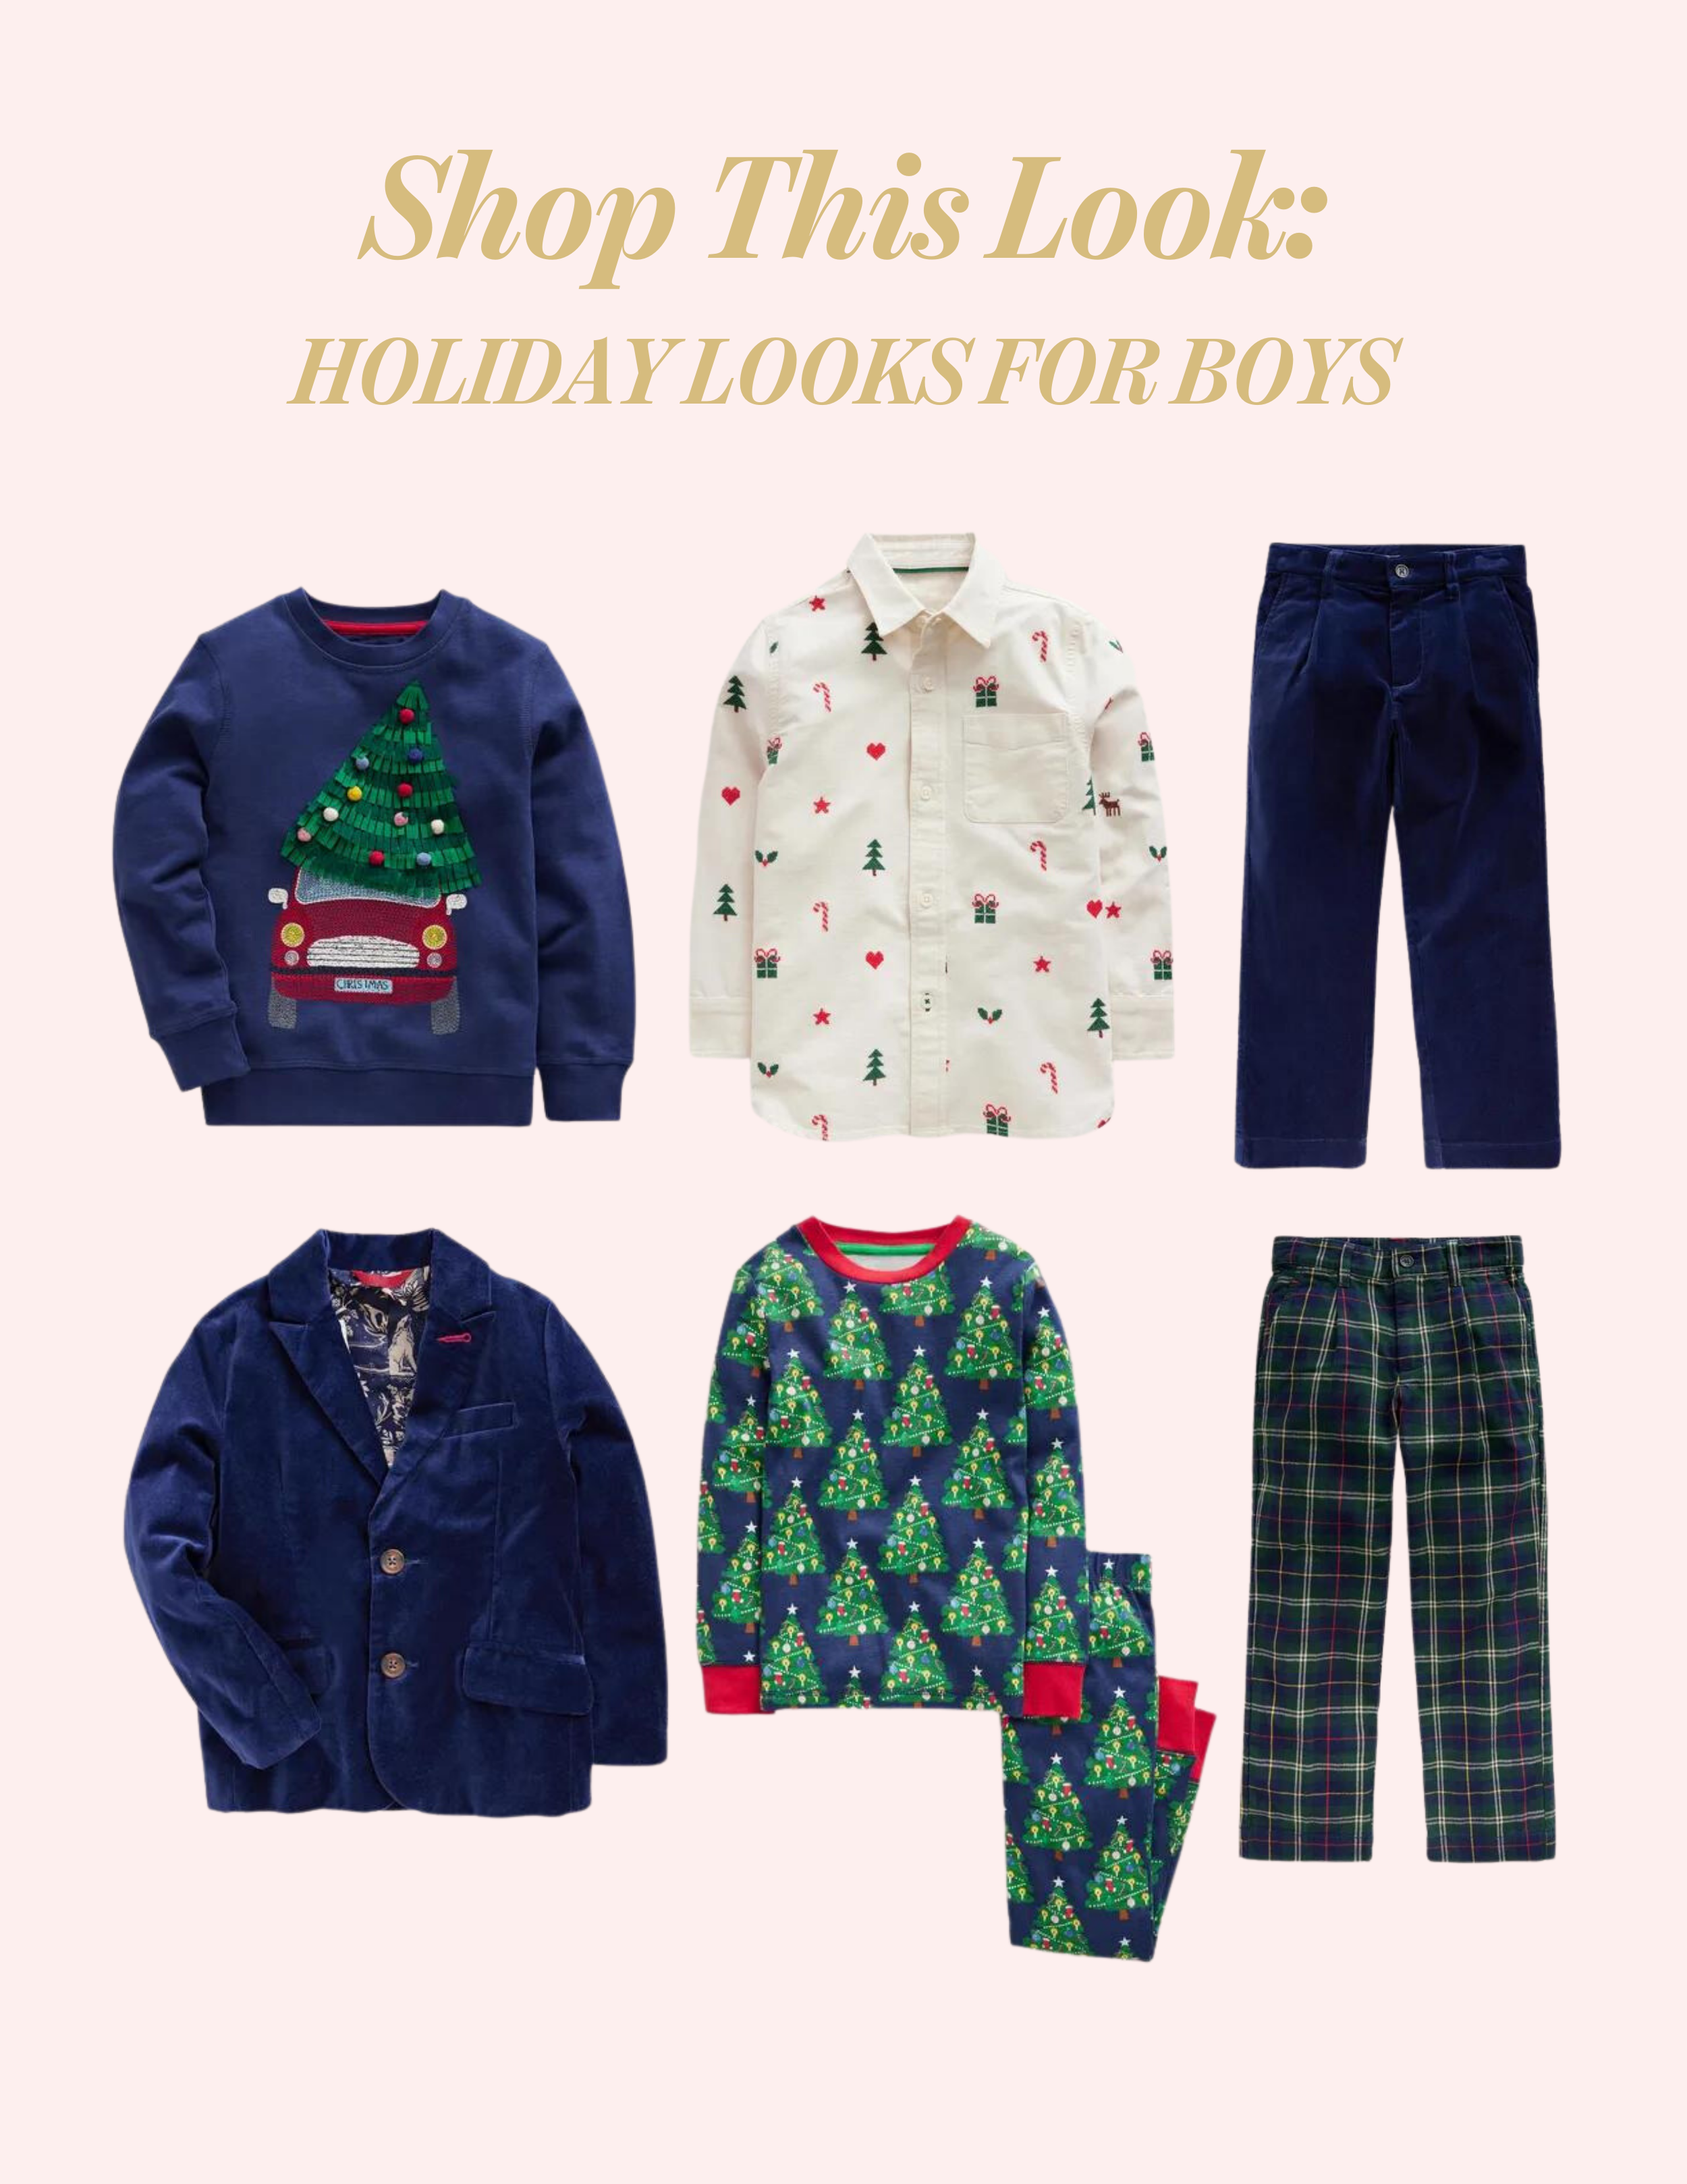 Shop This Look Holiday Looks for Boys.png